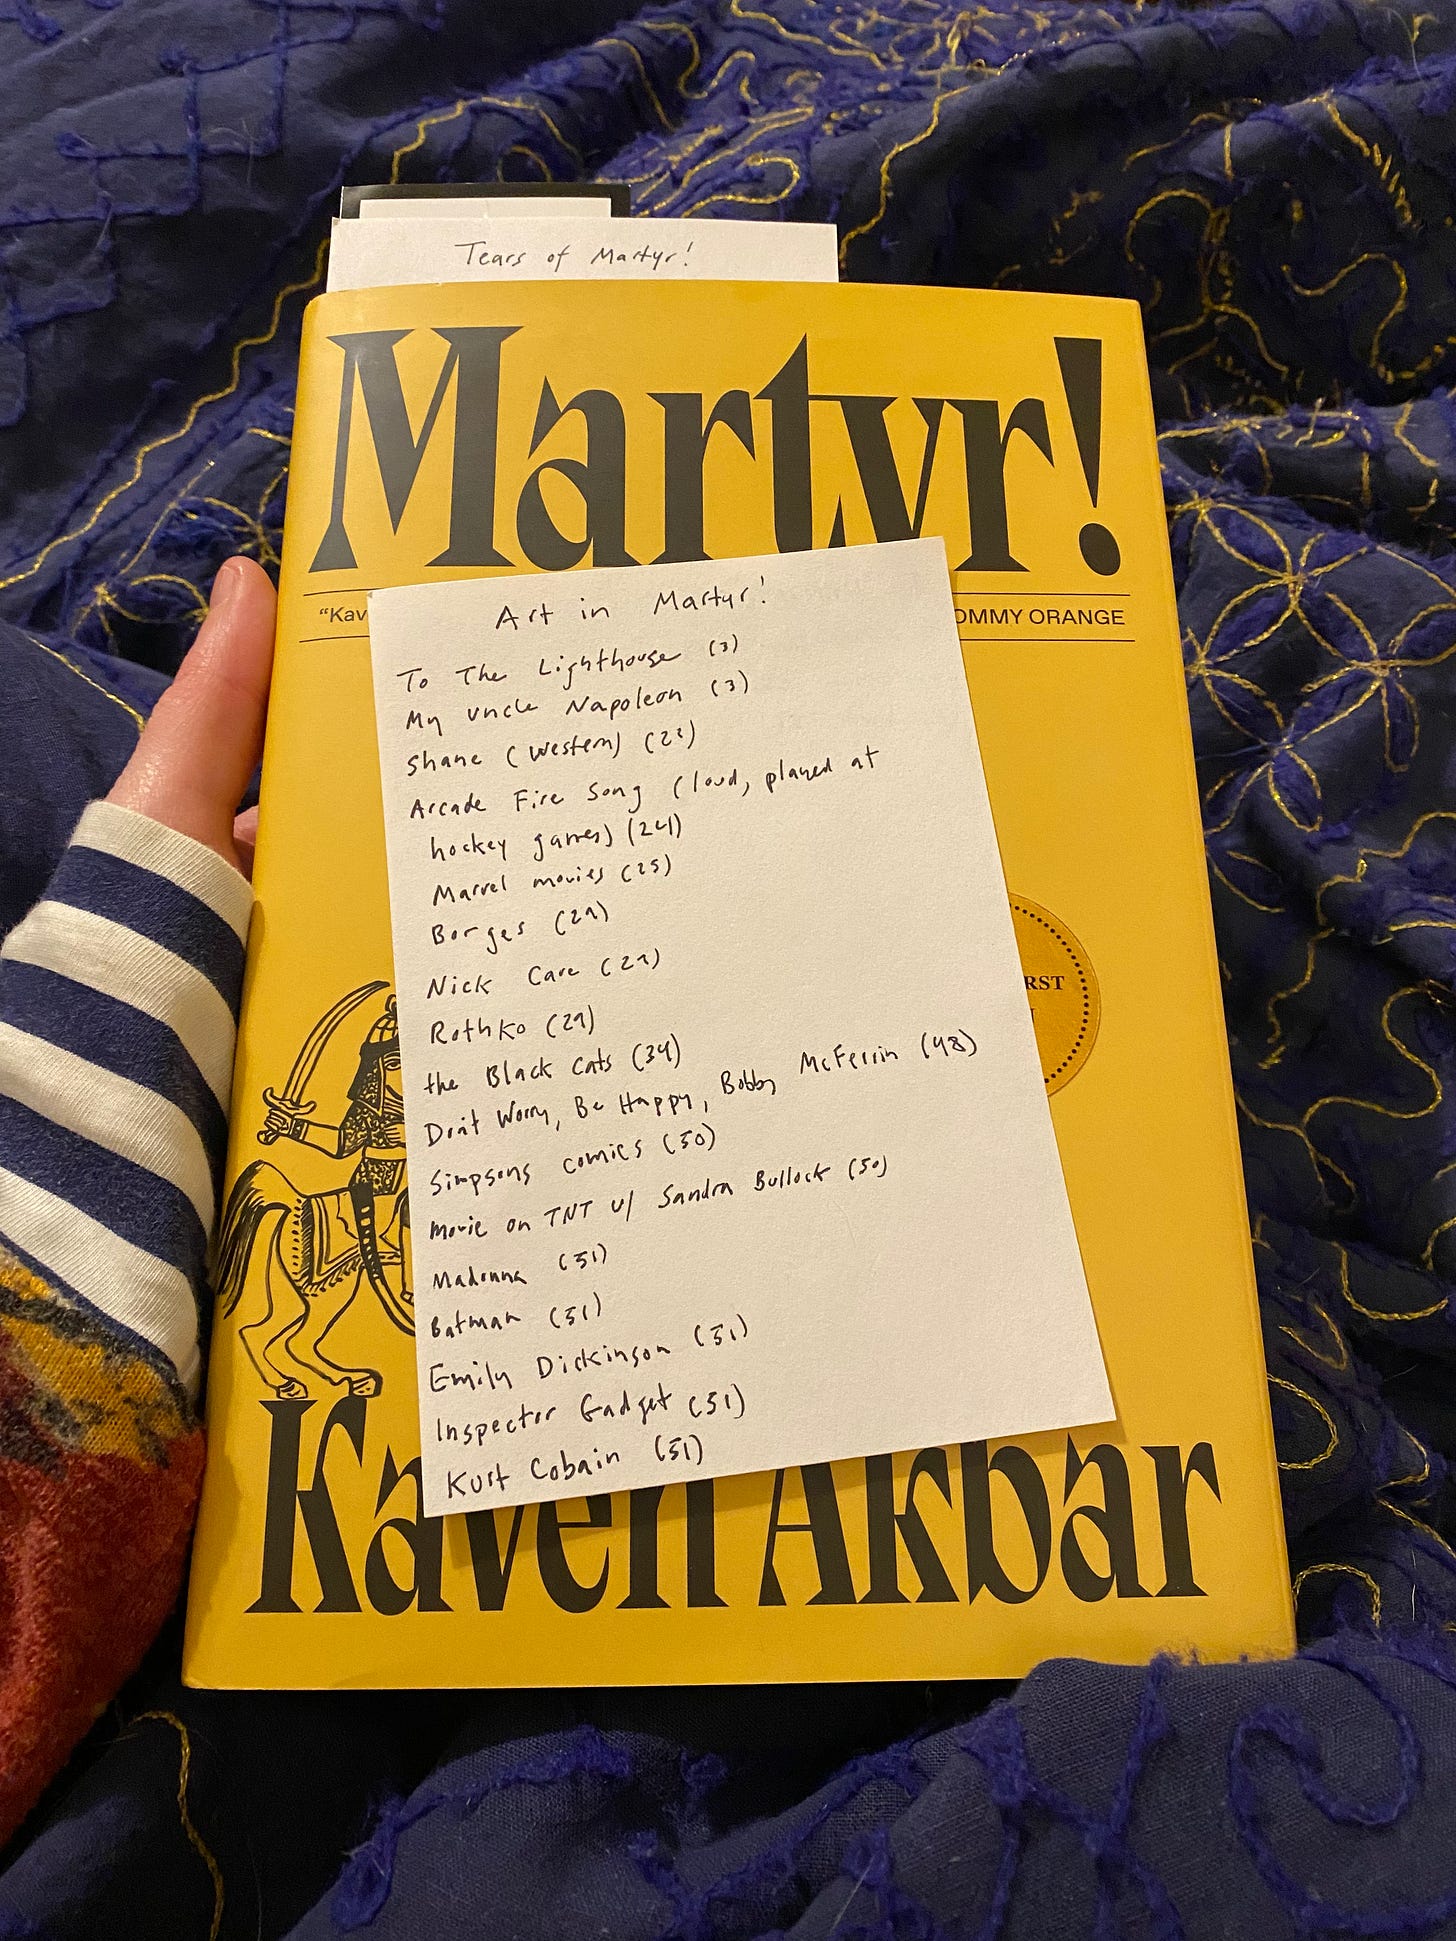 I’m holding the yellow hardcover of Martyr! An index card with a list of books, films, songs, artists, etc., along with page numbers, rests on top of the book.